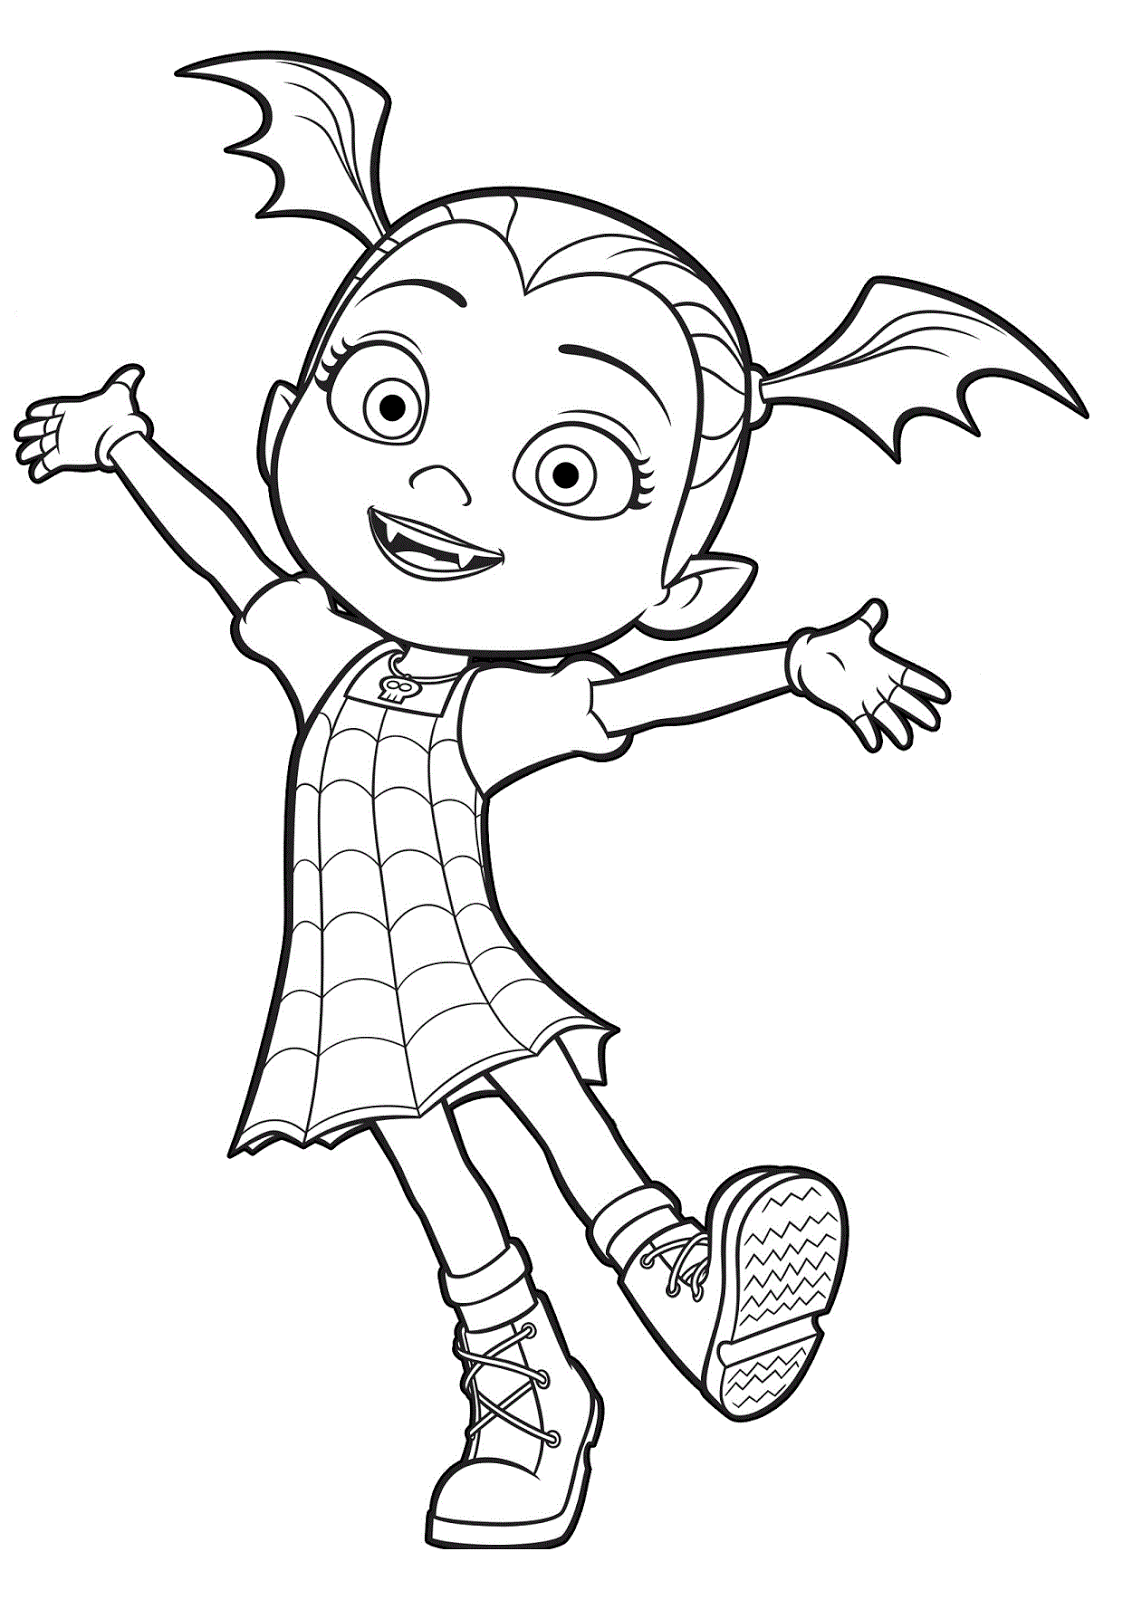 vampirina and friends coloring pages